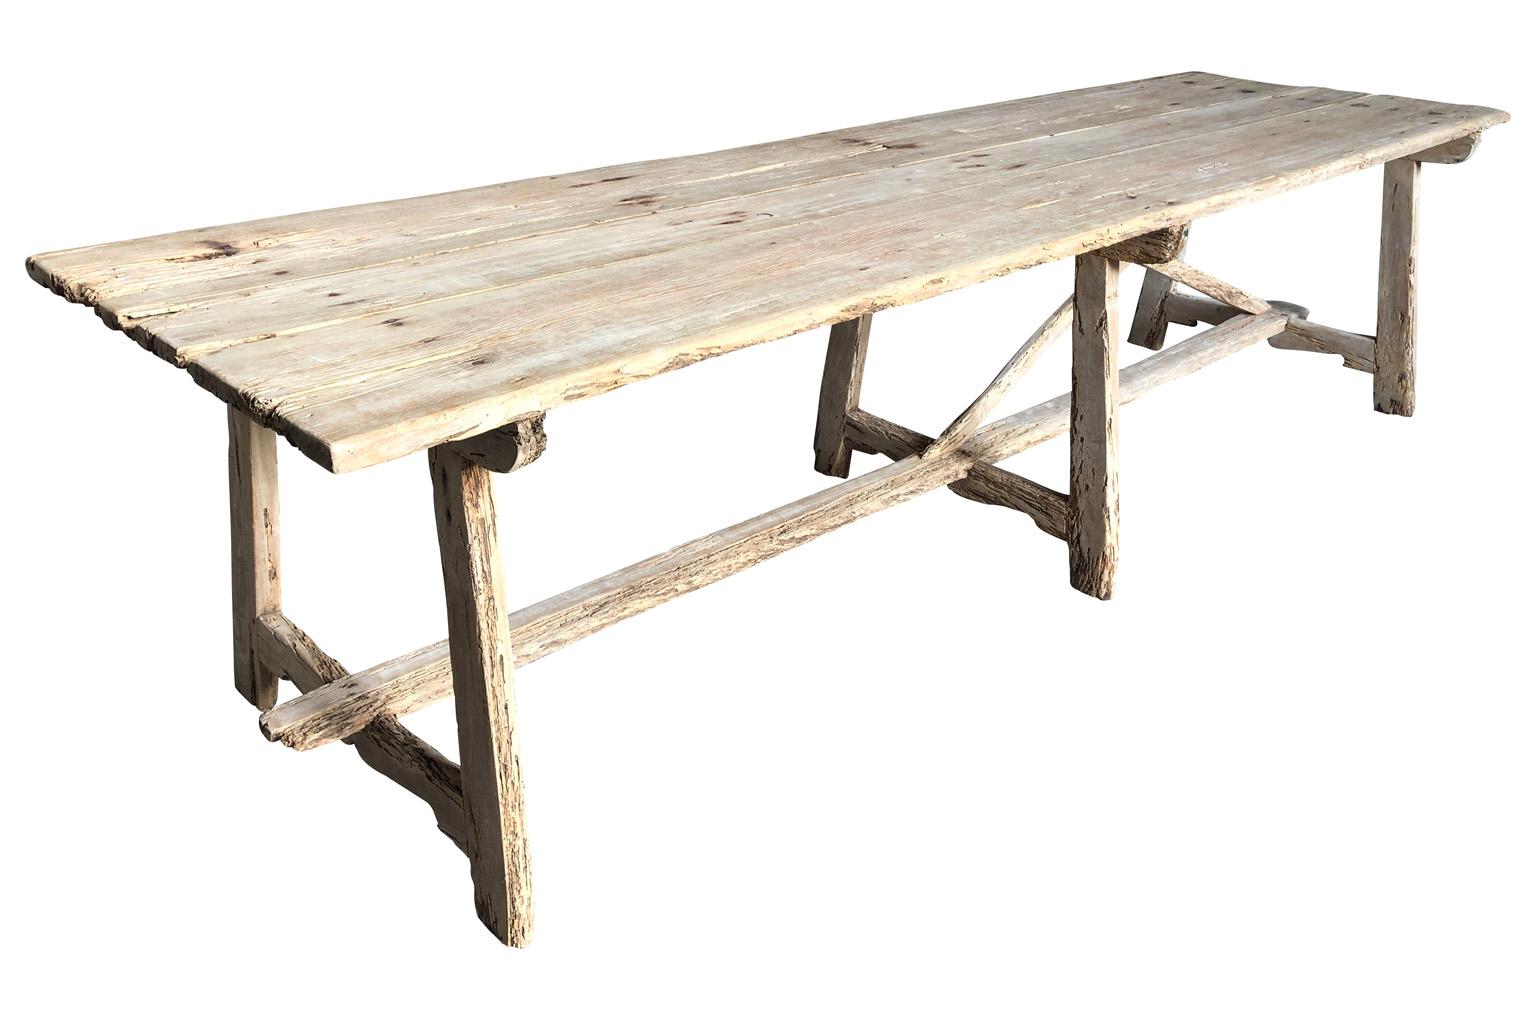 An exceptional grand scale farm table - trestle table from the Catalan region of Spain. Beautifully constructed from apple wood with excellent patina. The table's Minimalist lines blend wonderfully with traditional or modern styling. A perfect table